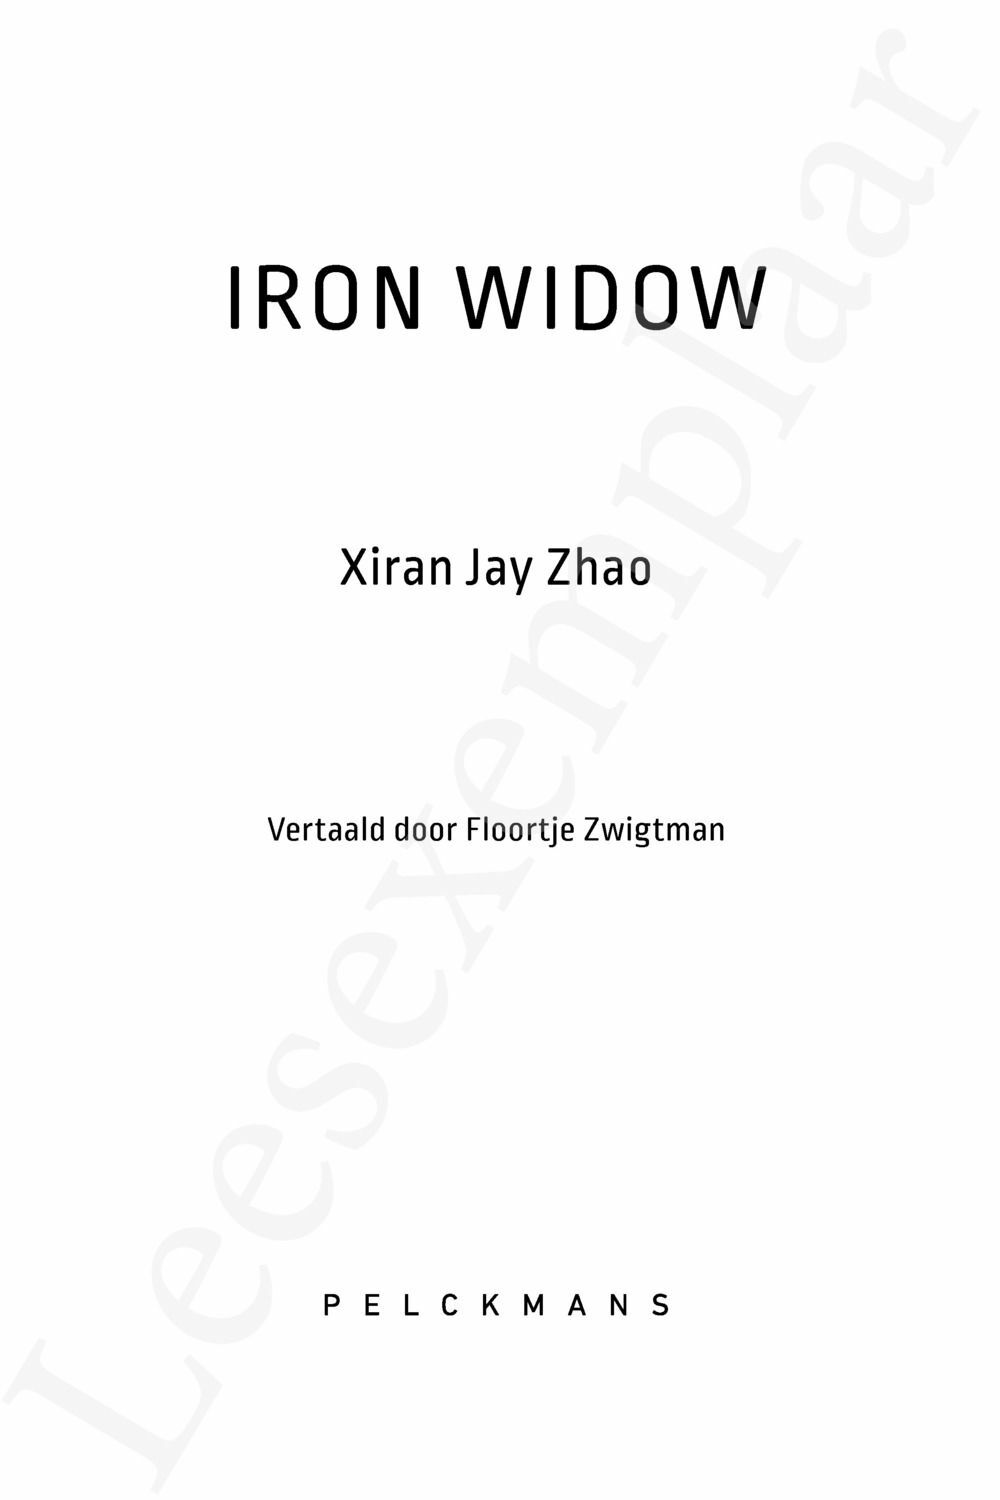 Preview: Iron Widow